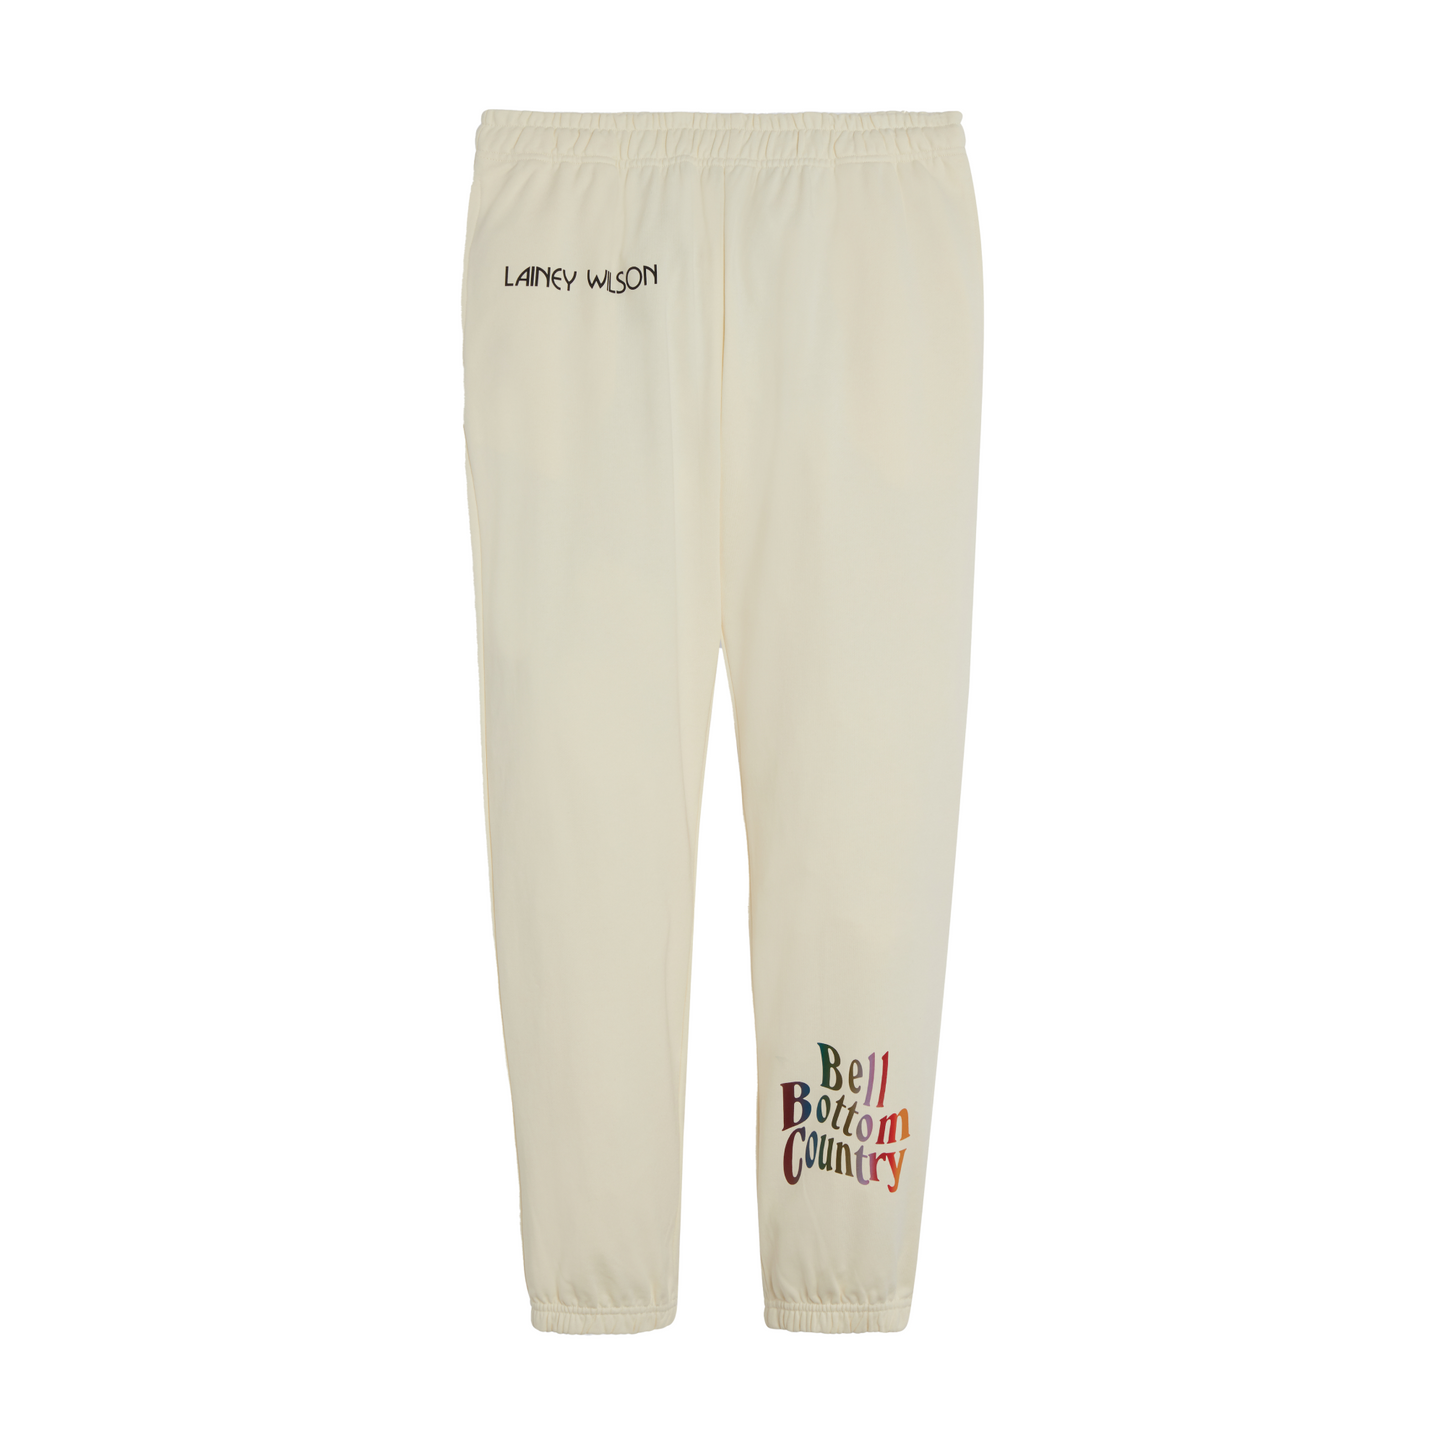 Bell Bottom Country Sweatpants